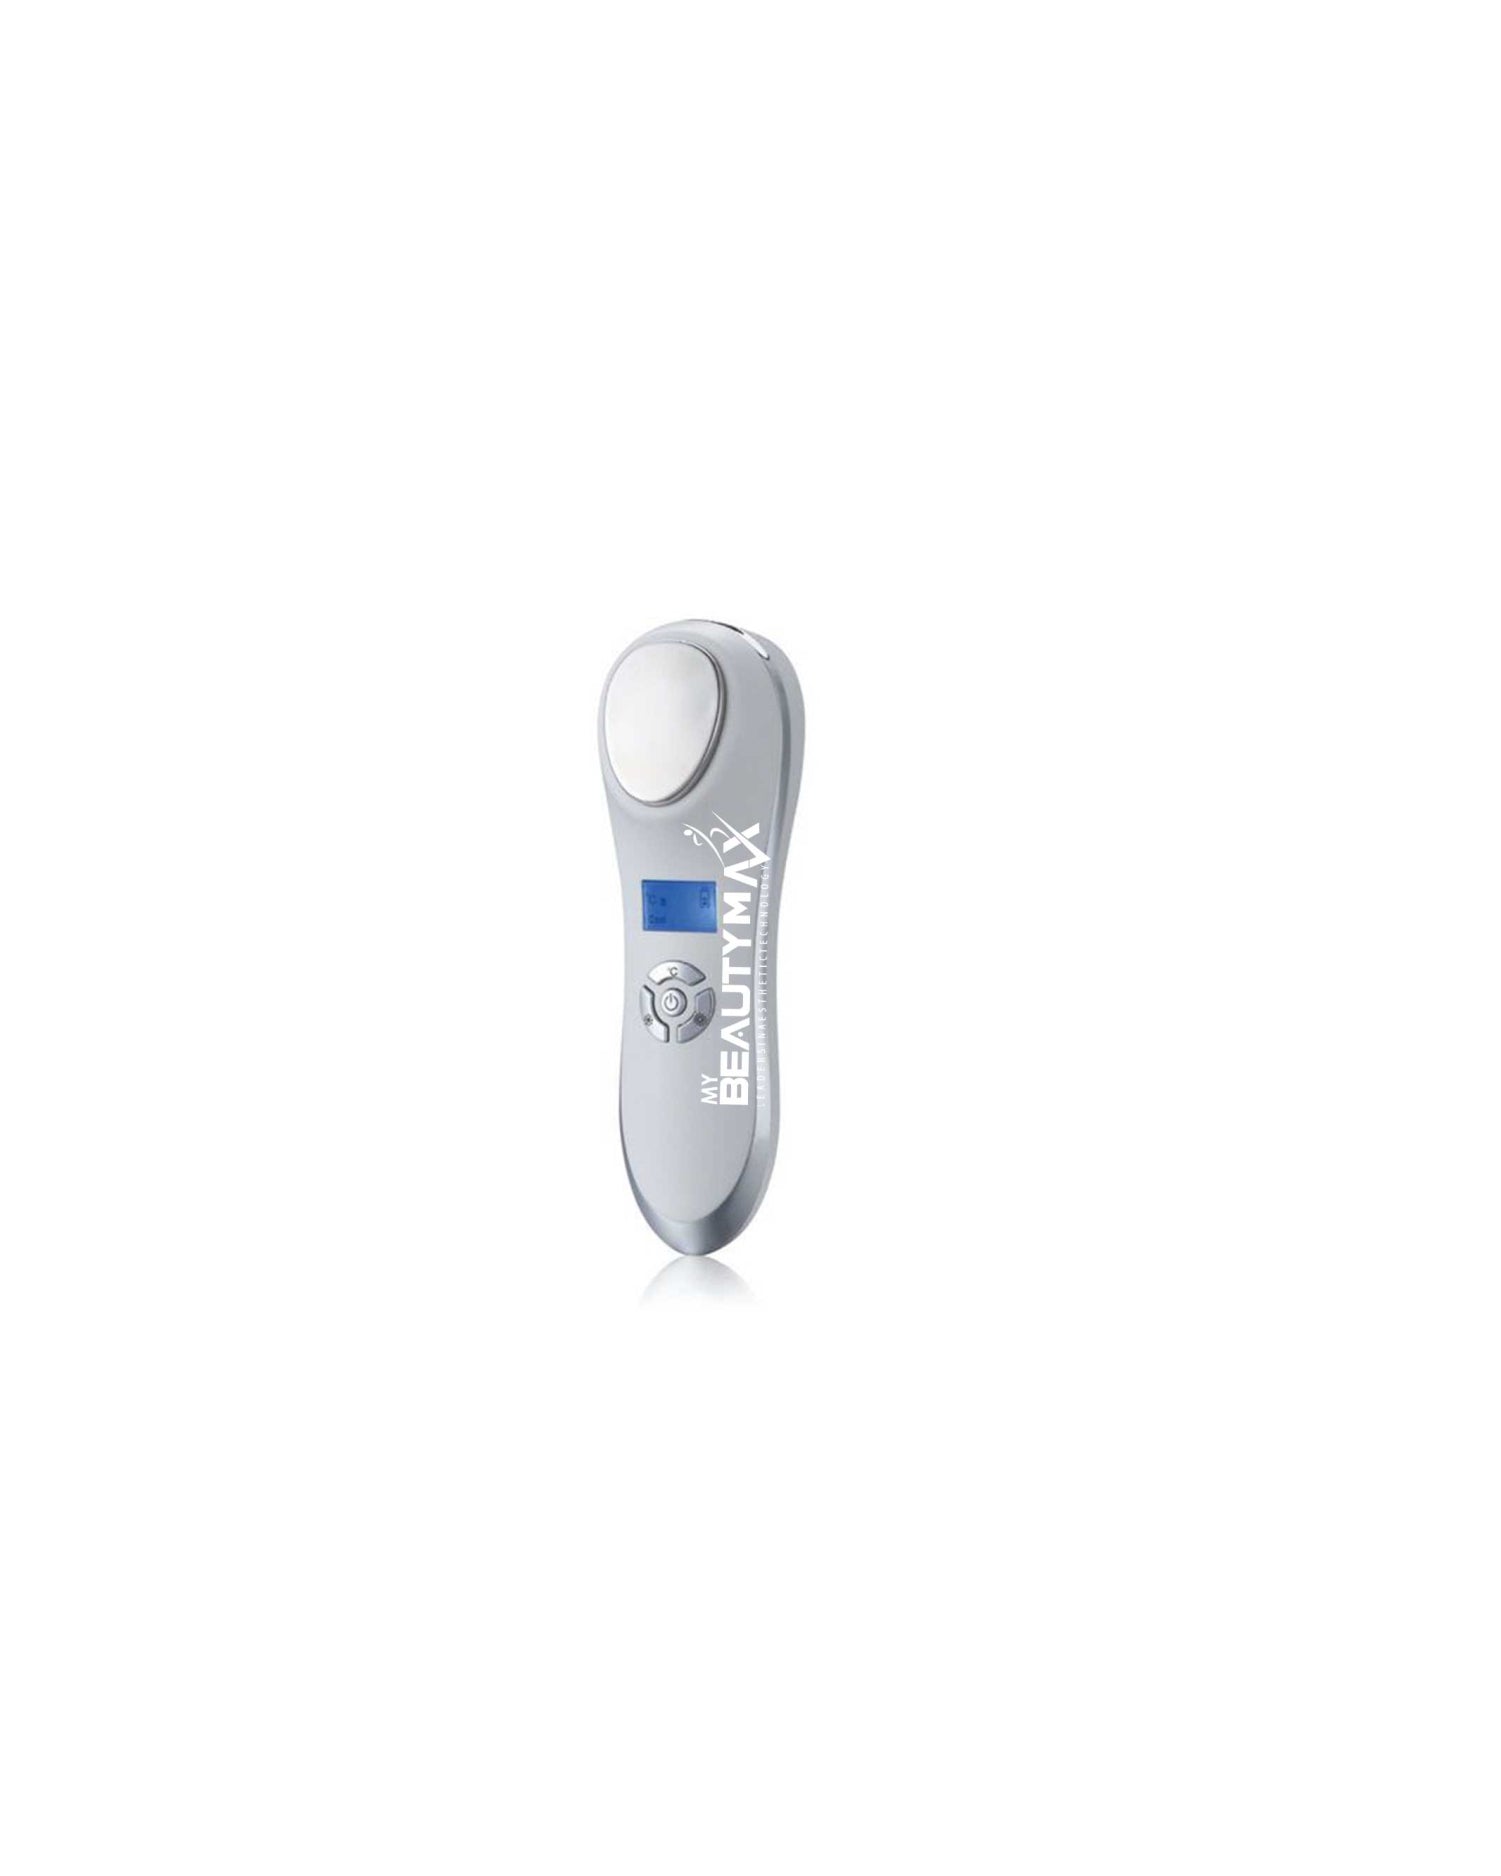 Hot & Cold Vibrate Home Use Beauty Device